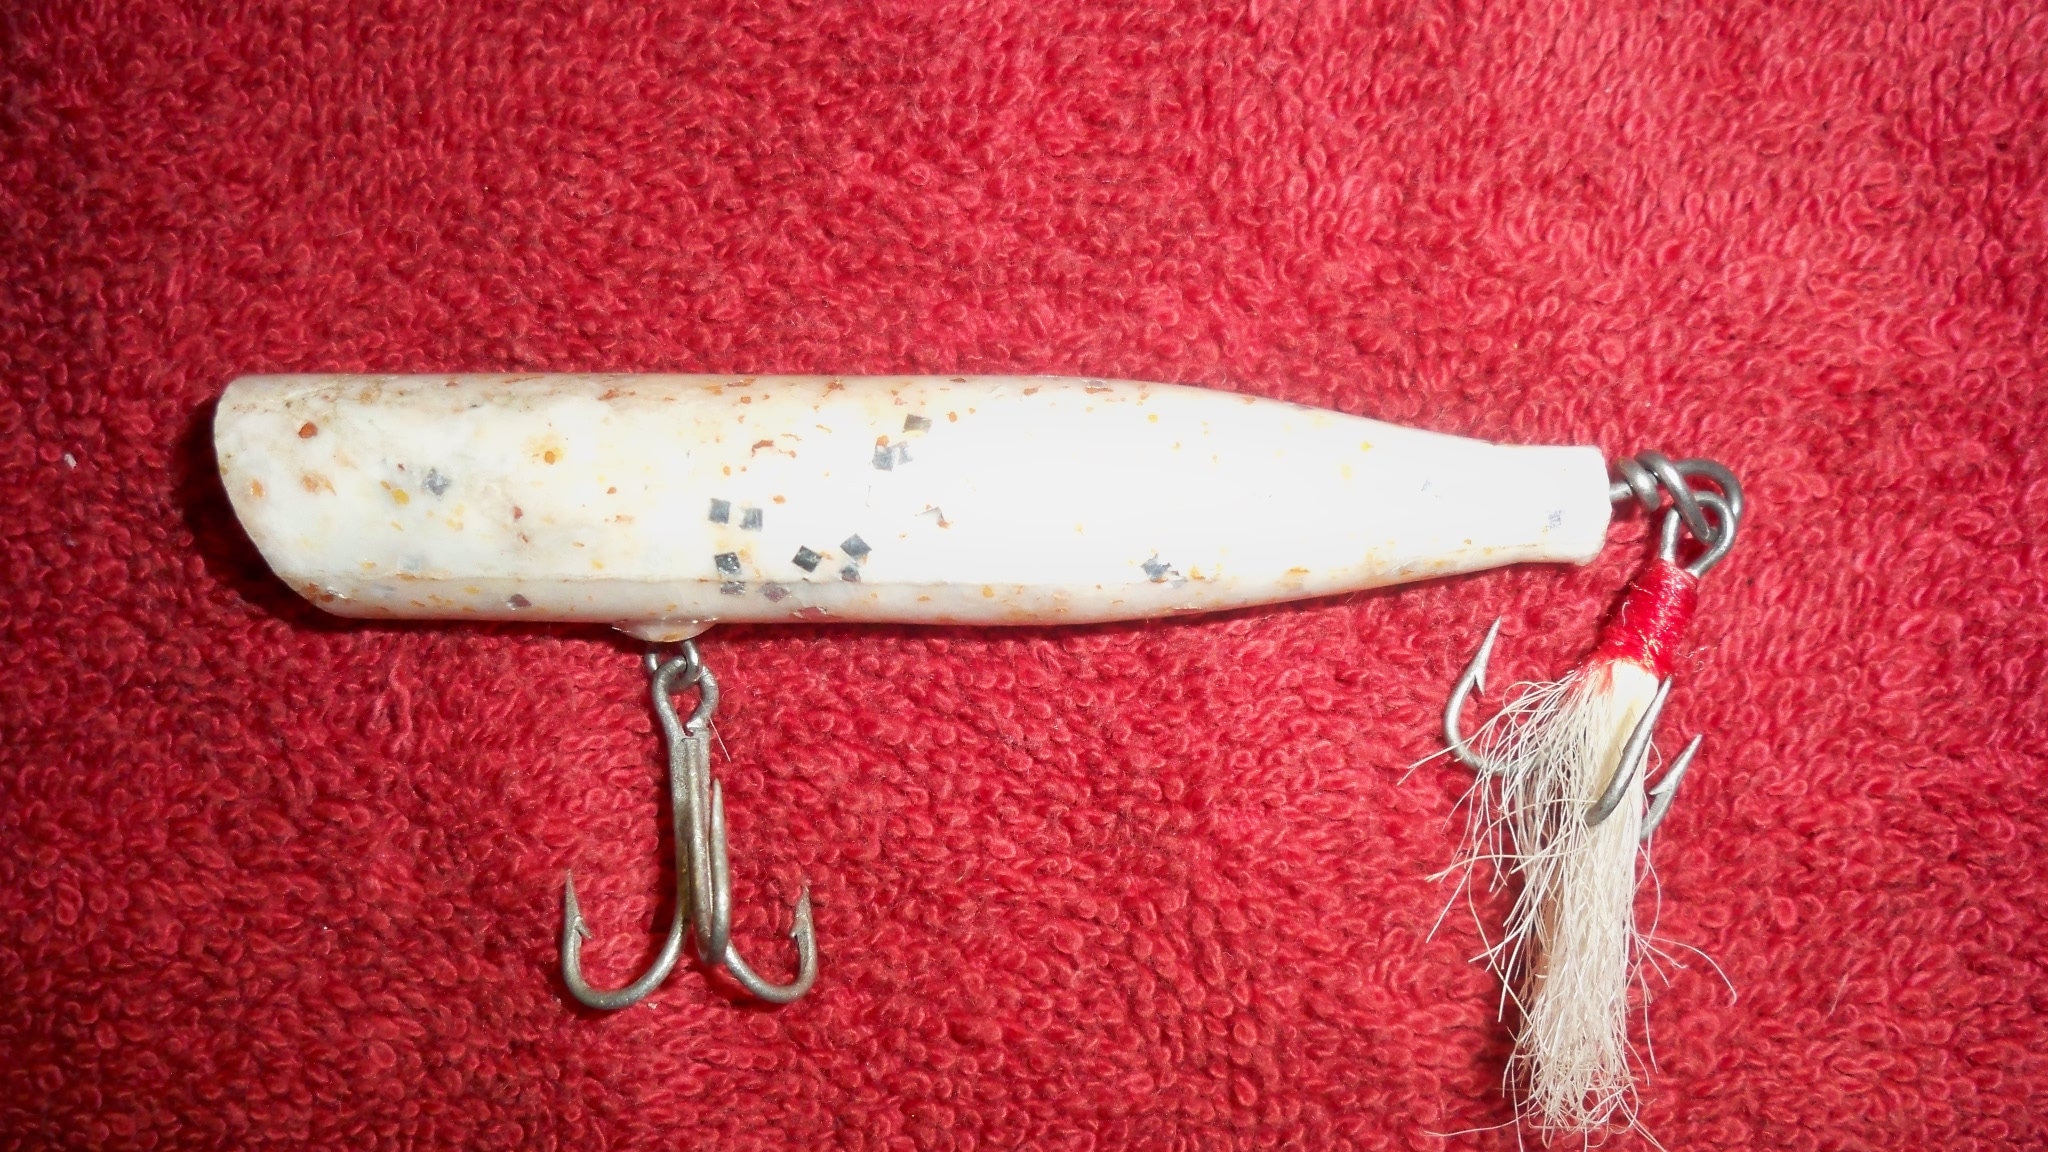 (2) Vintage Atom Striper 4 Top Water Popper Fishing Lures Lot of 2 